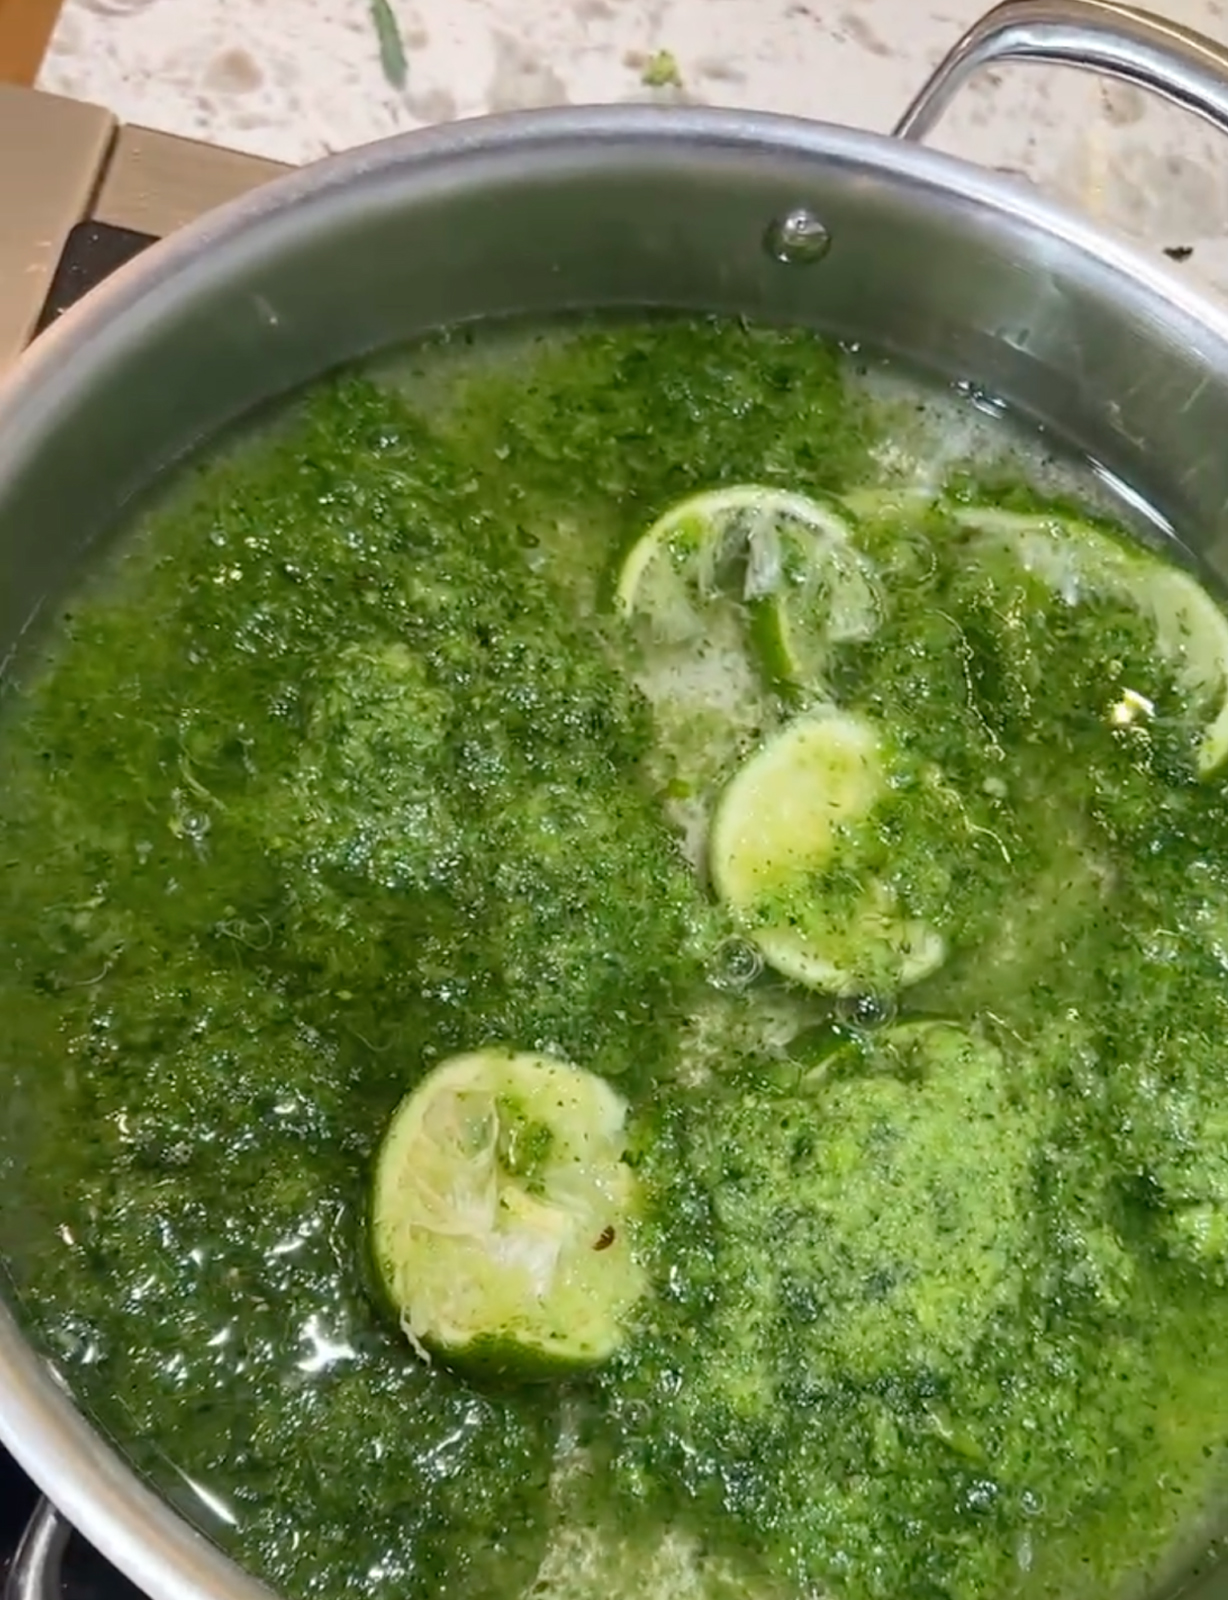 Green soup with limes